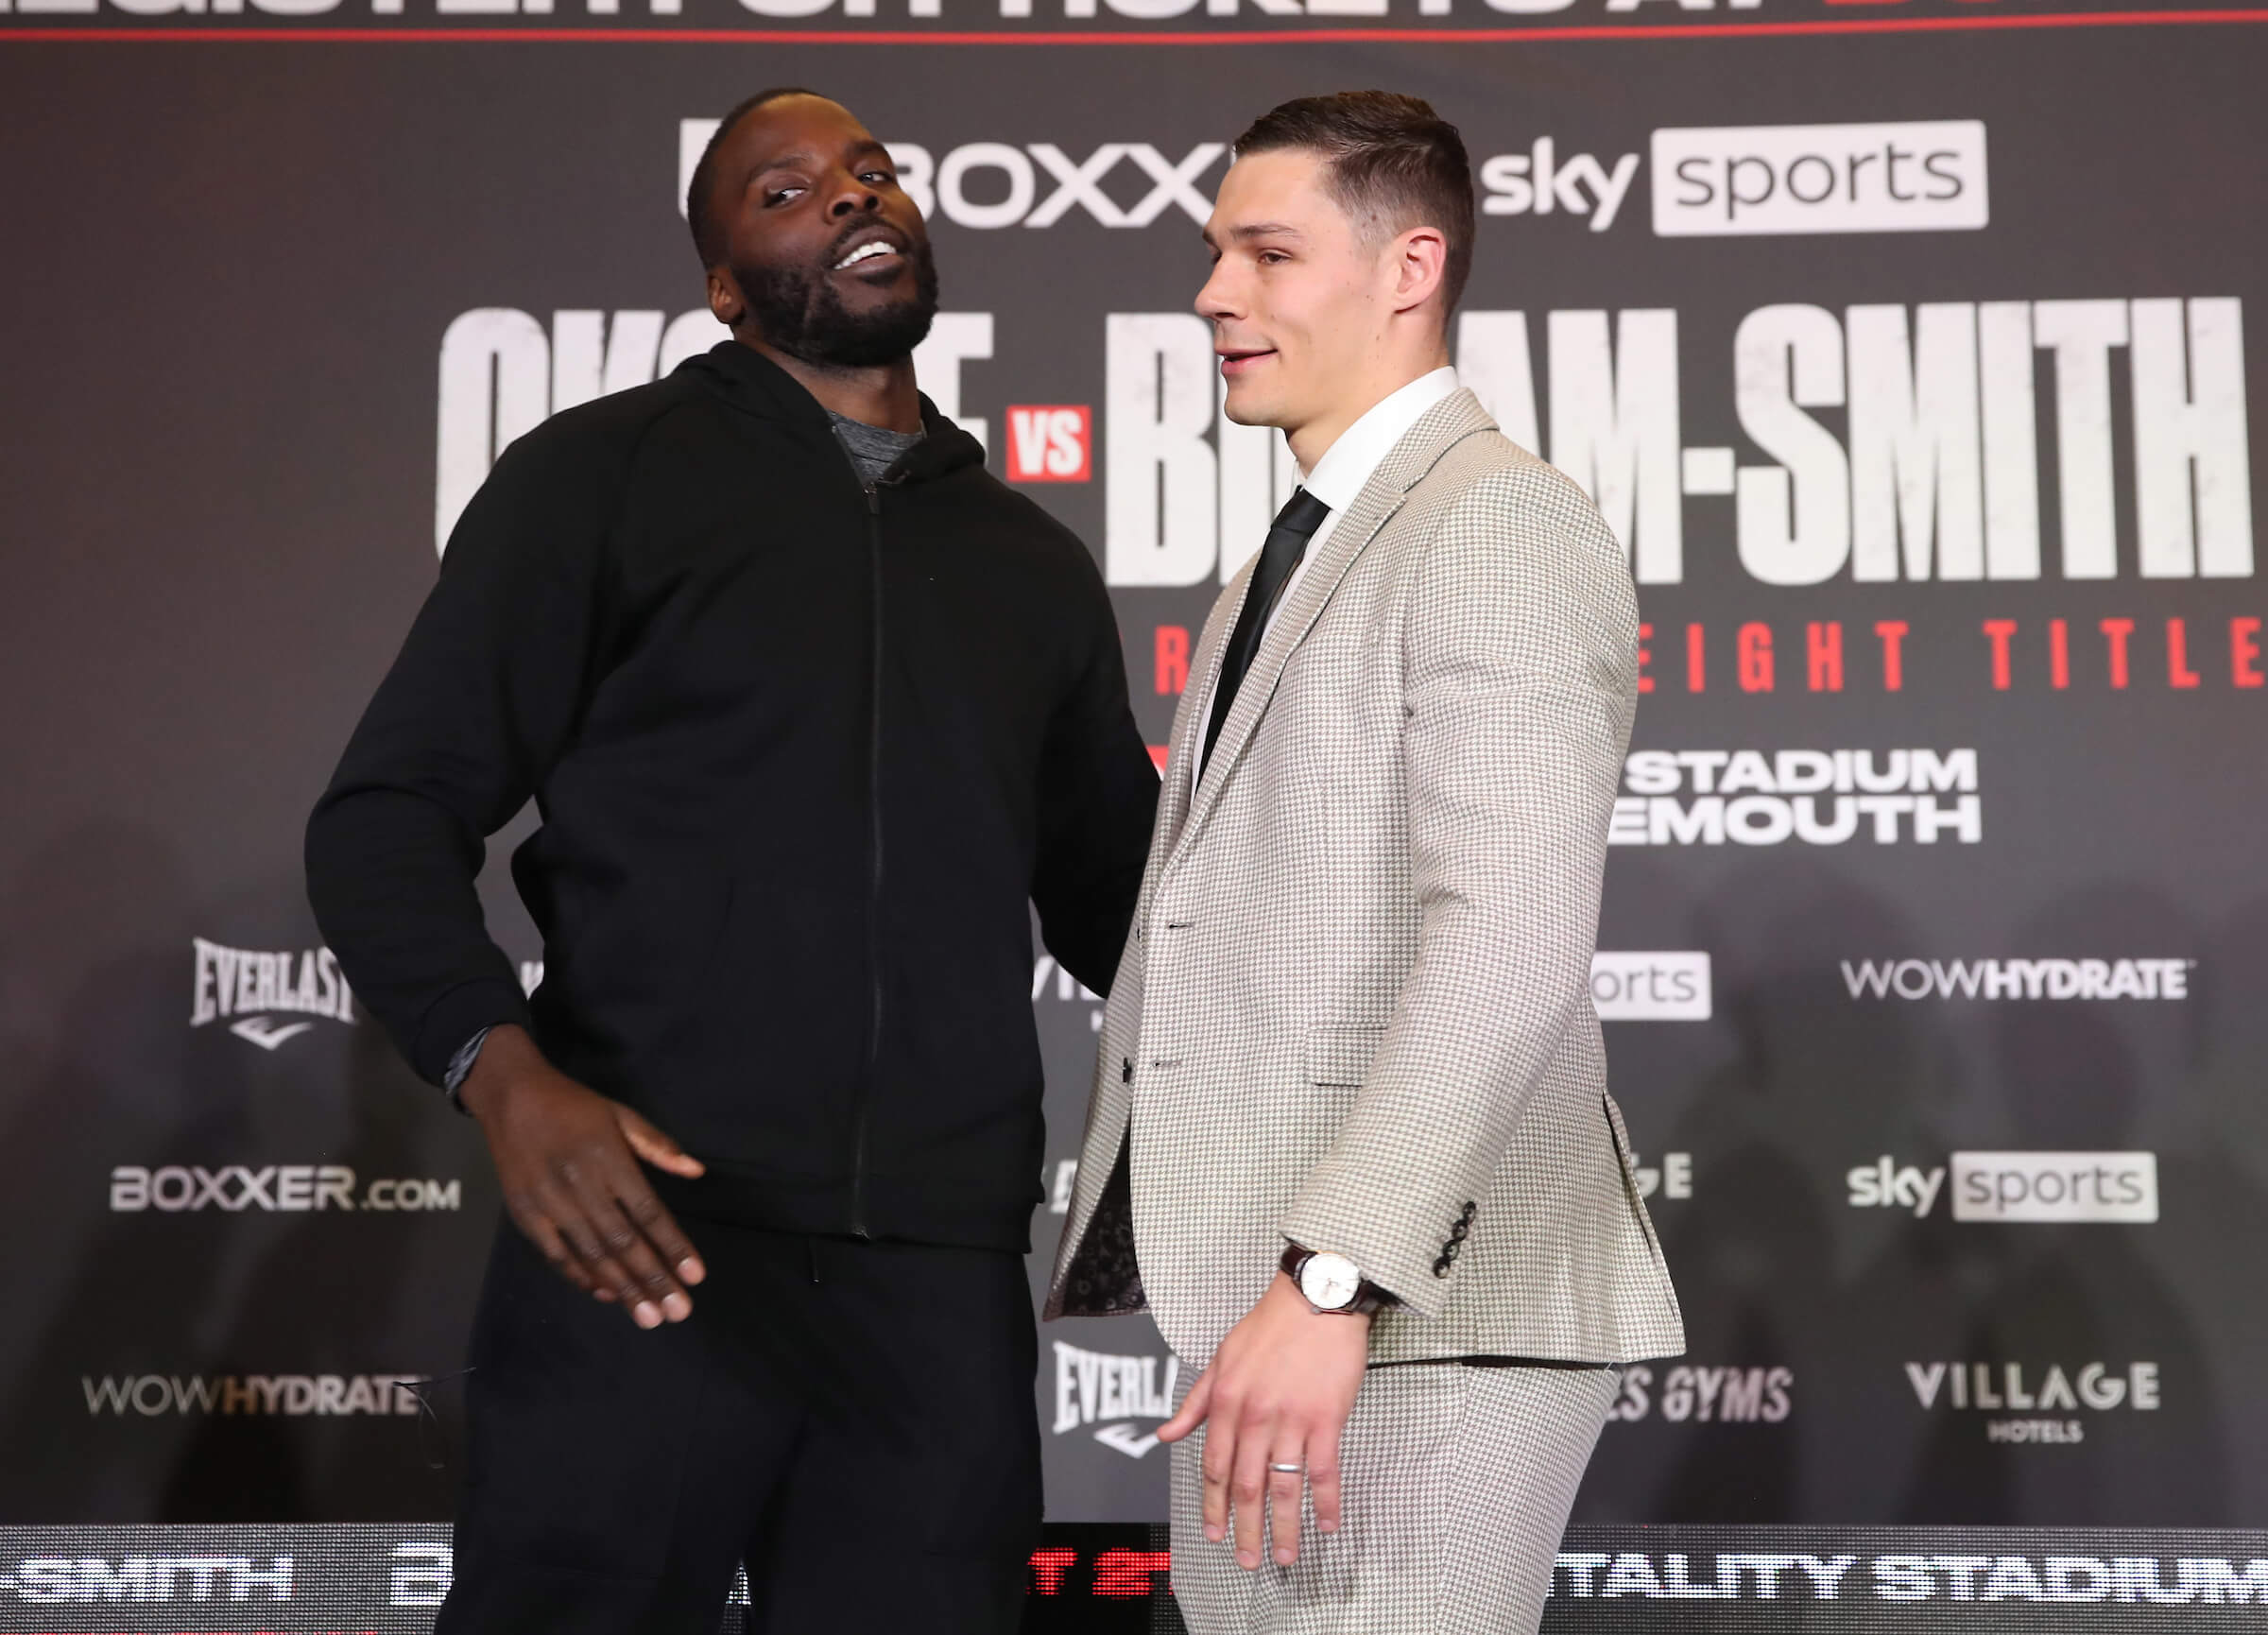 Billam-Smith excited for the perfect night against Okolie in Bournemouth